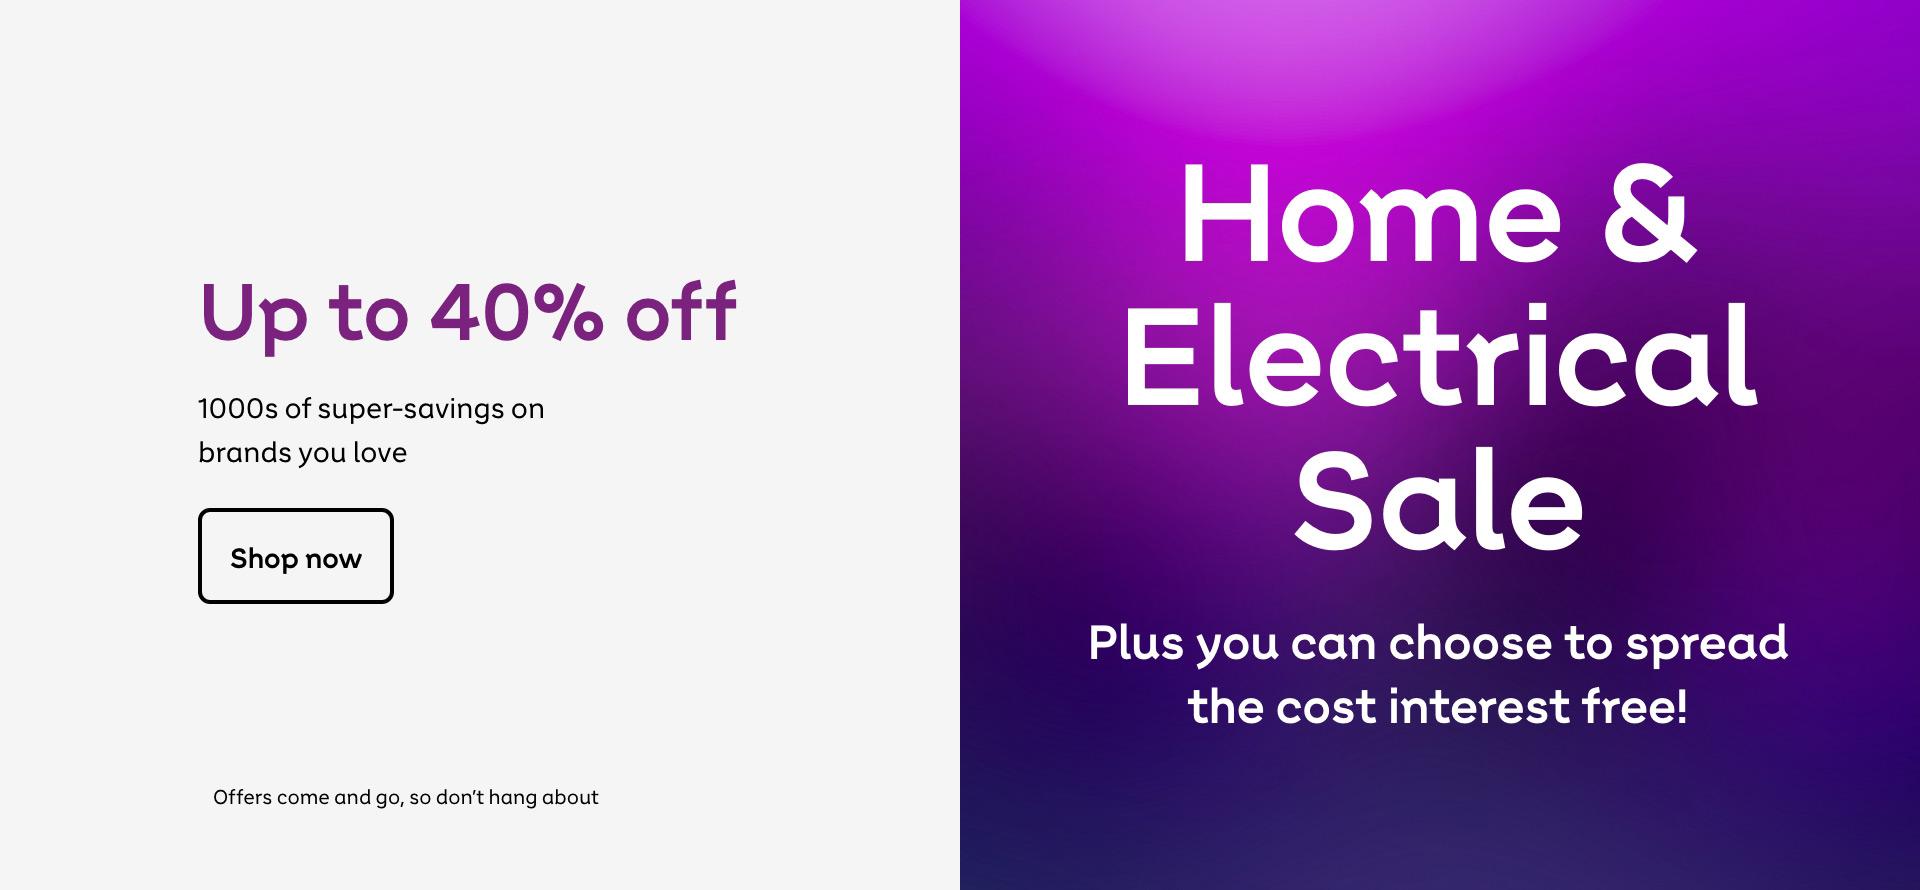 Home & Electrical sale. Ready, set, shop! Plus you can choose to spread the cost interest free. Shop now. Offers come and go, so don't hang about.